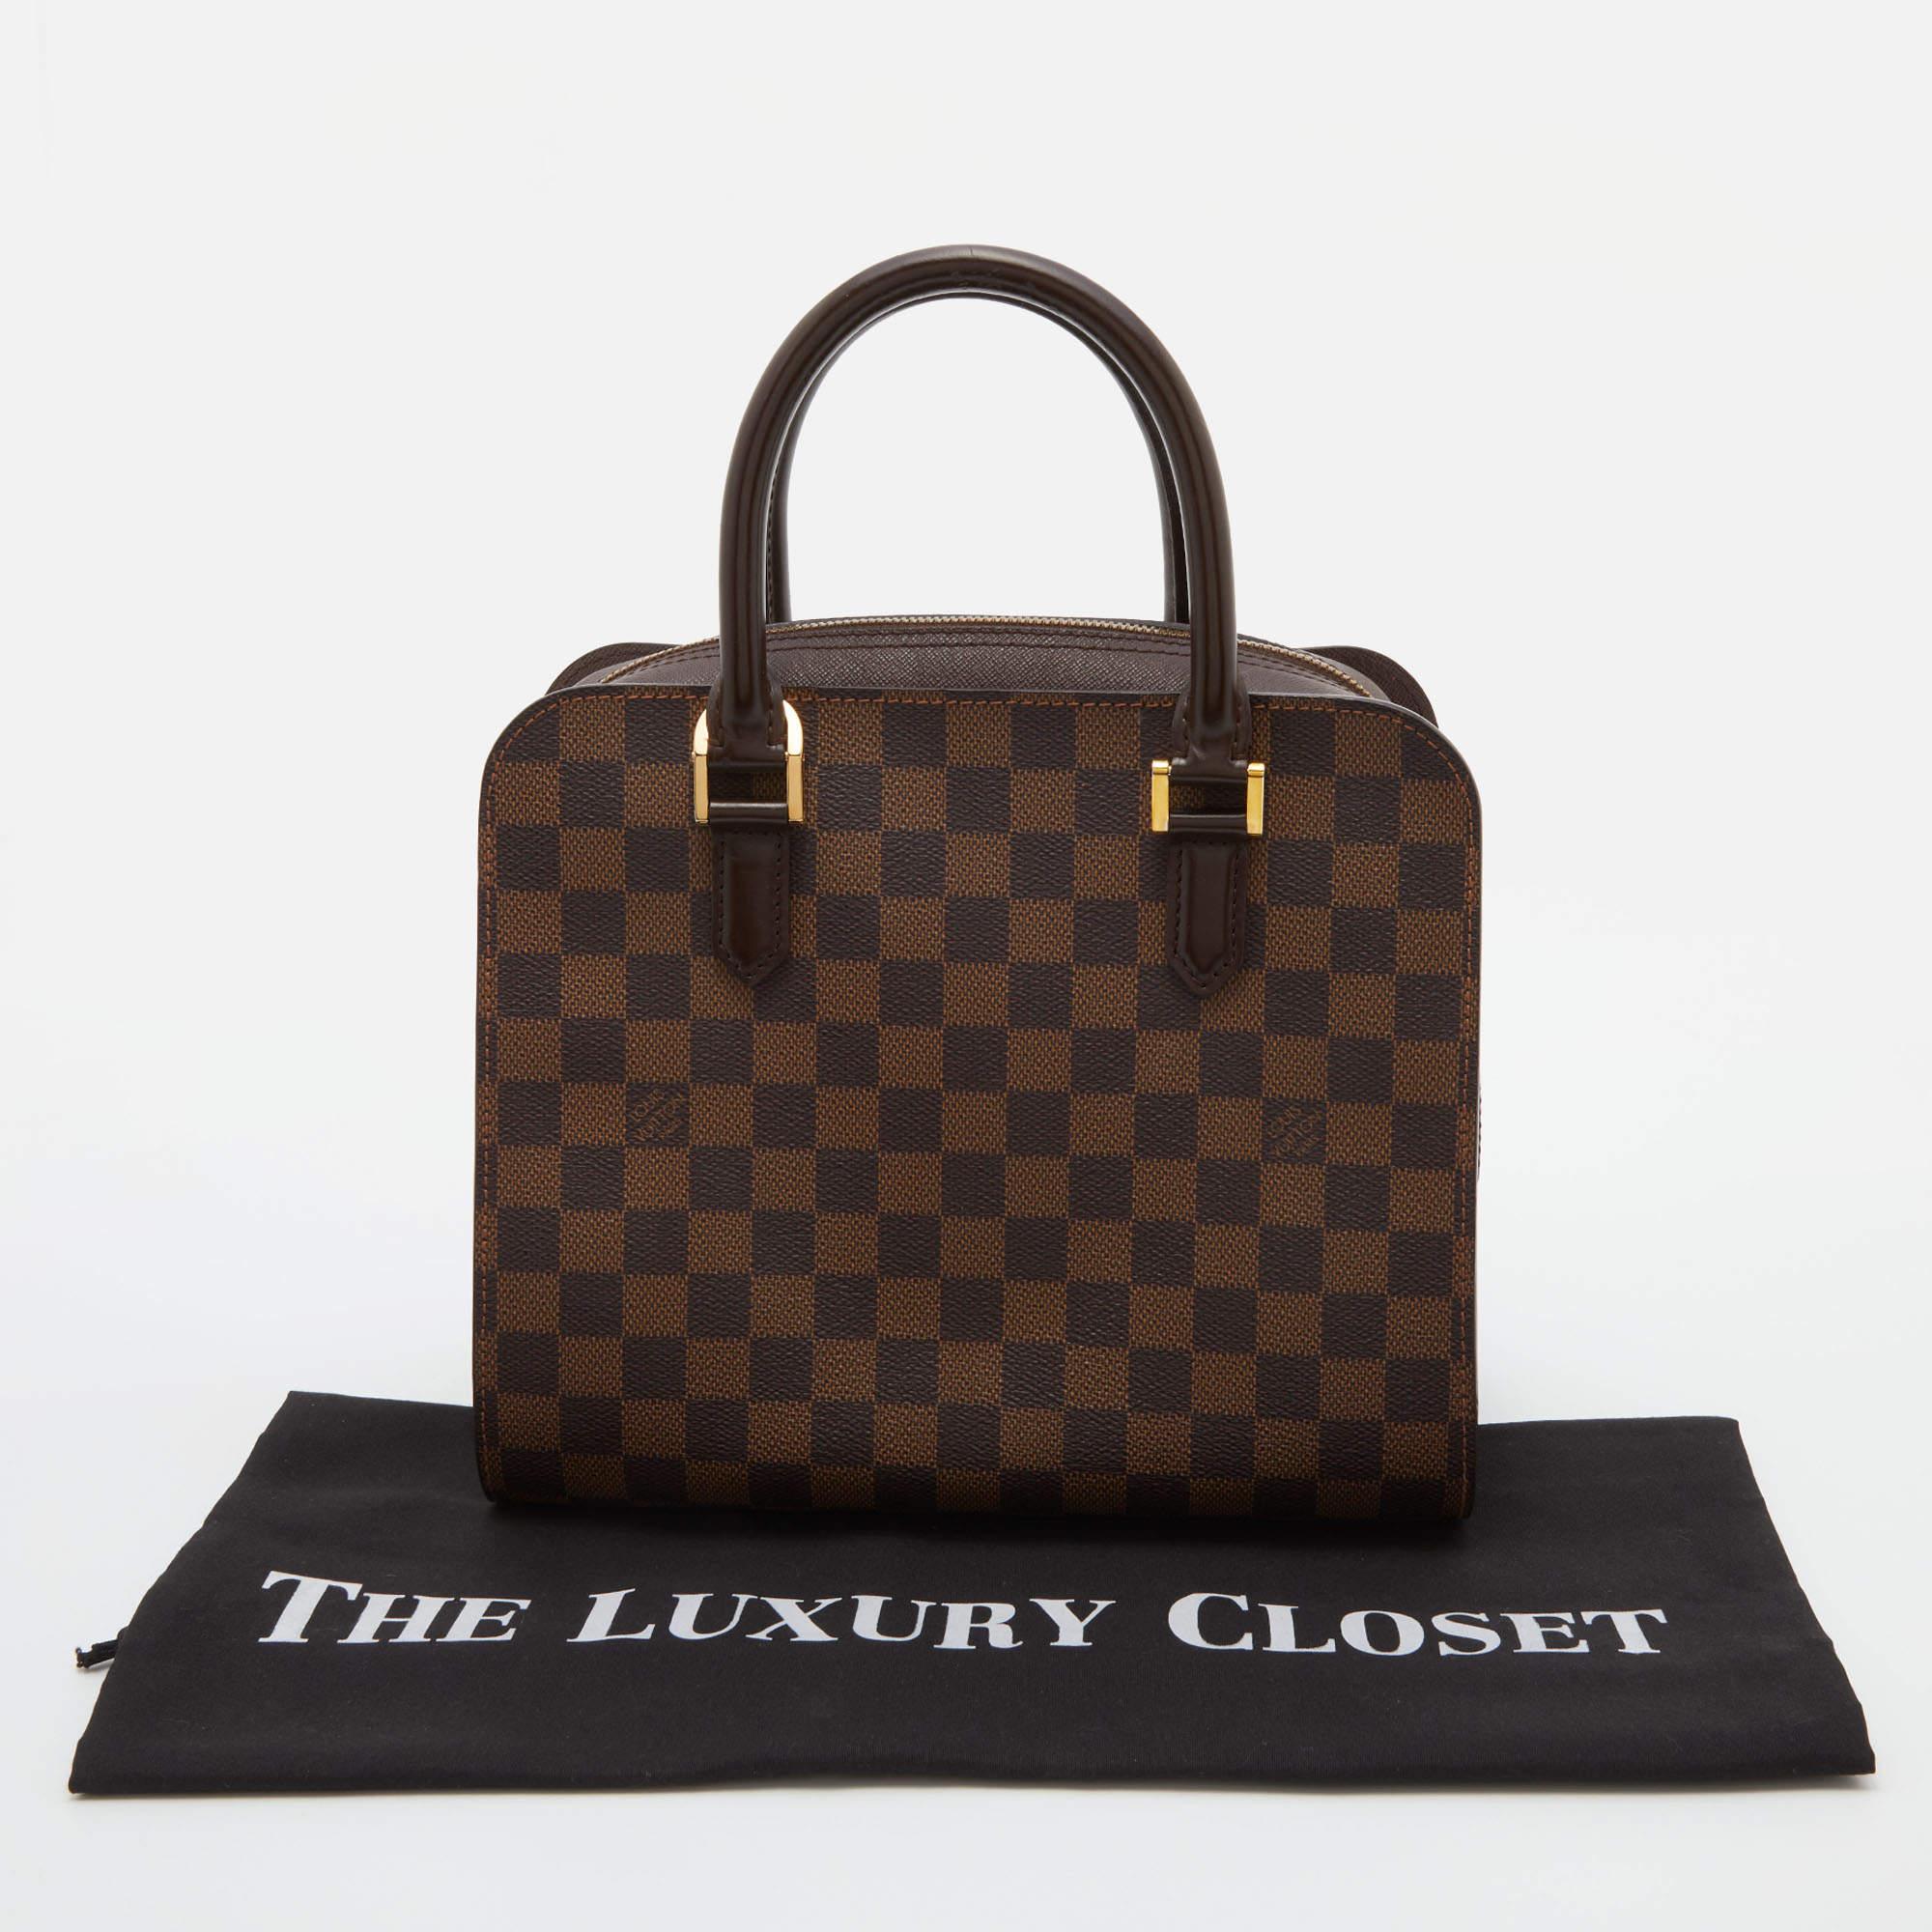 Louis Vuitton Damier Ebene Canvas and Leather Triana Bag 8